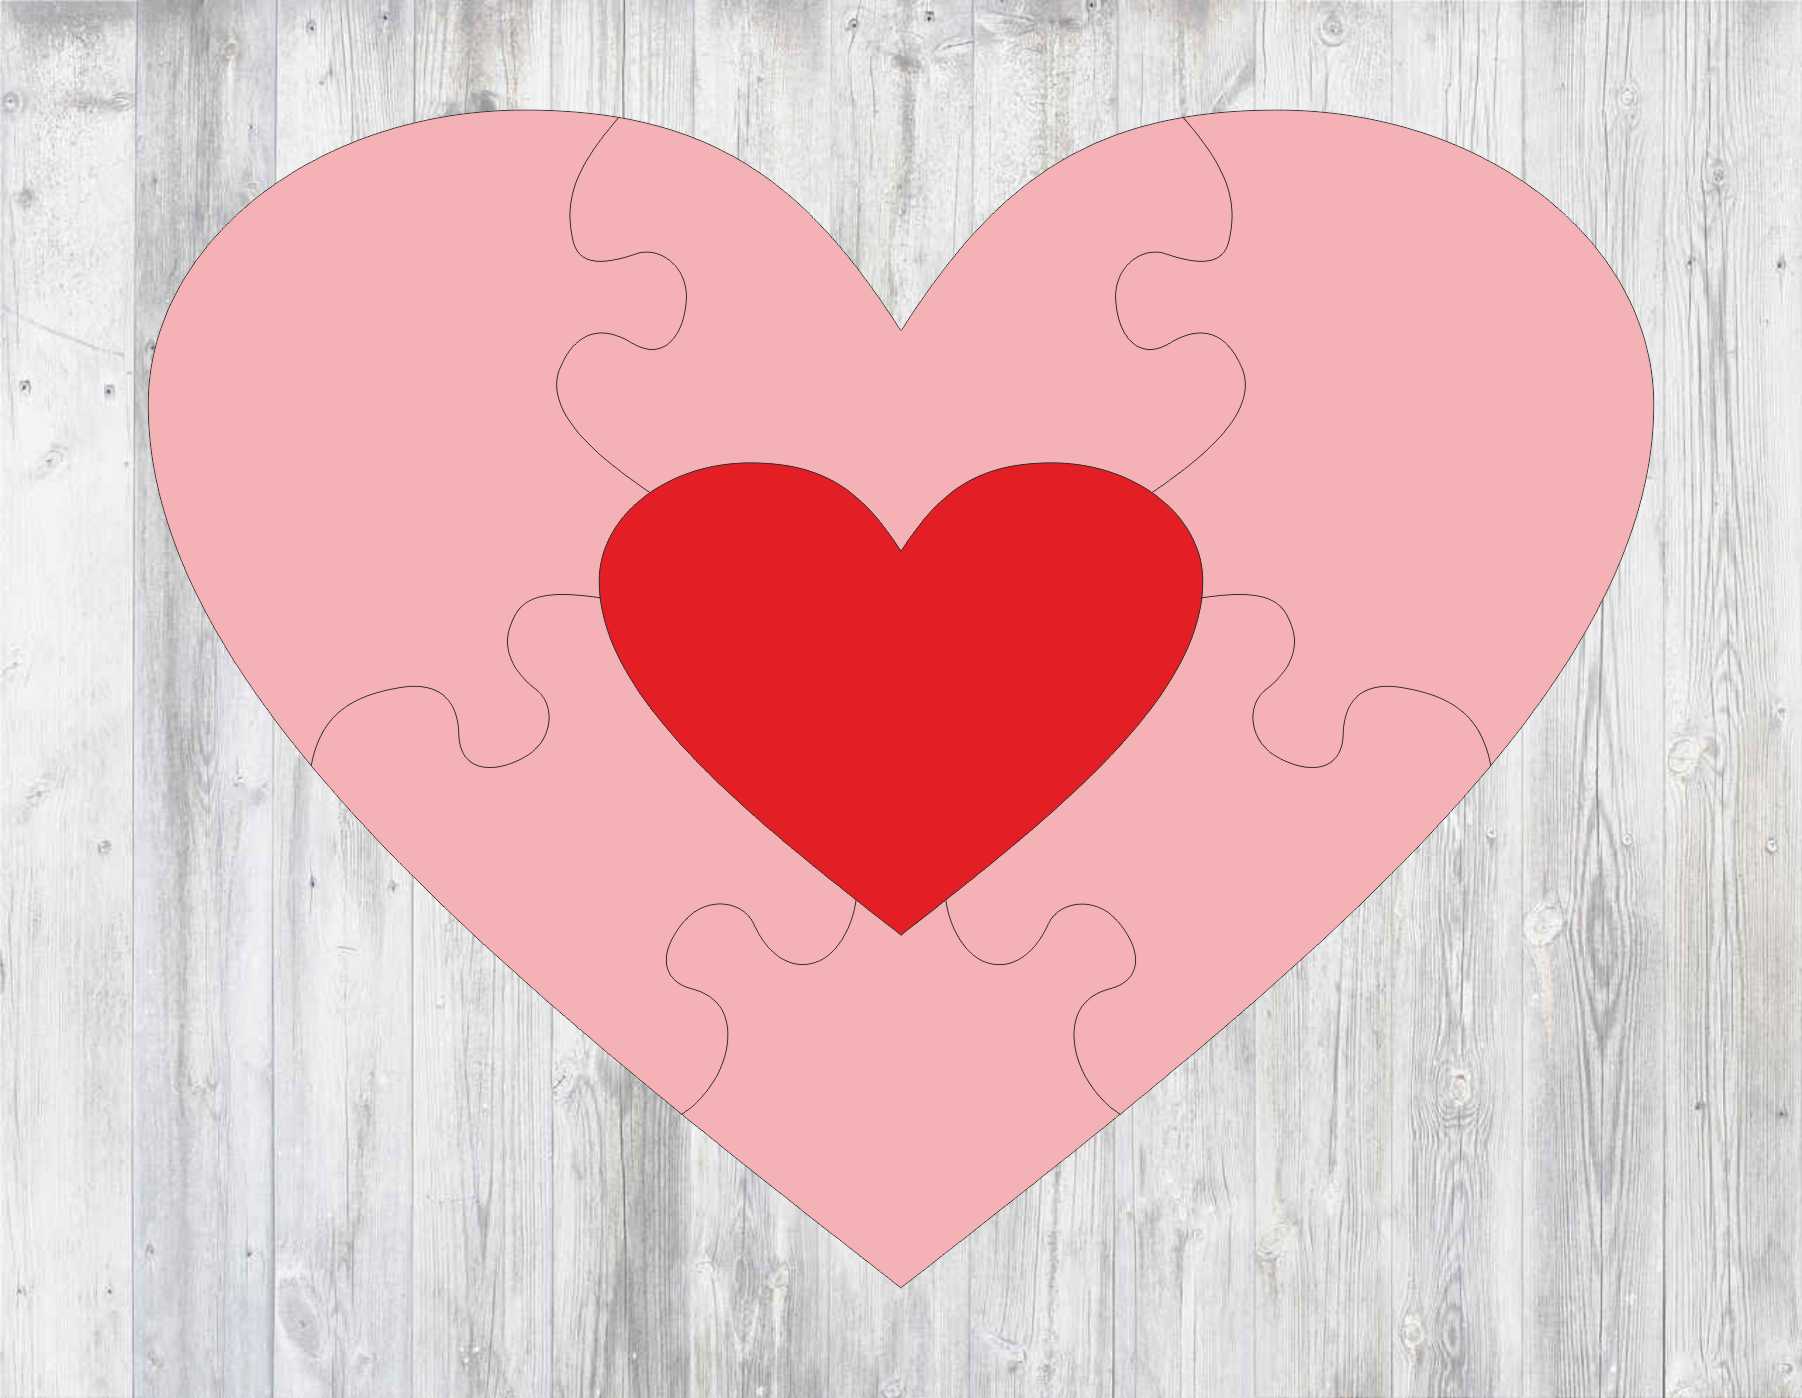 laser-cut-heart-puzzle-template-free-vector-cdr-download-3axis-co